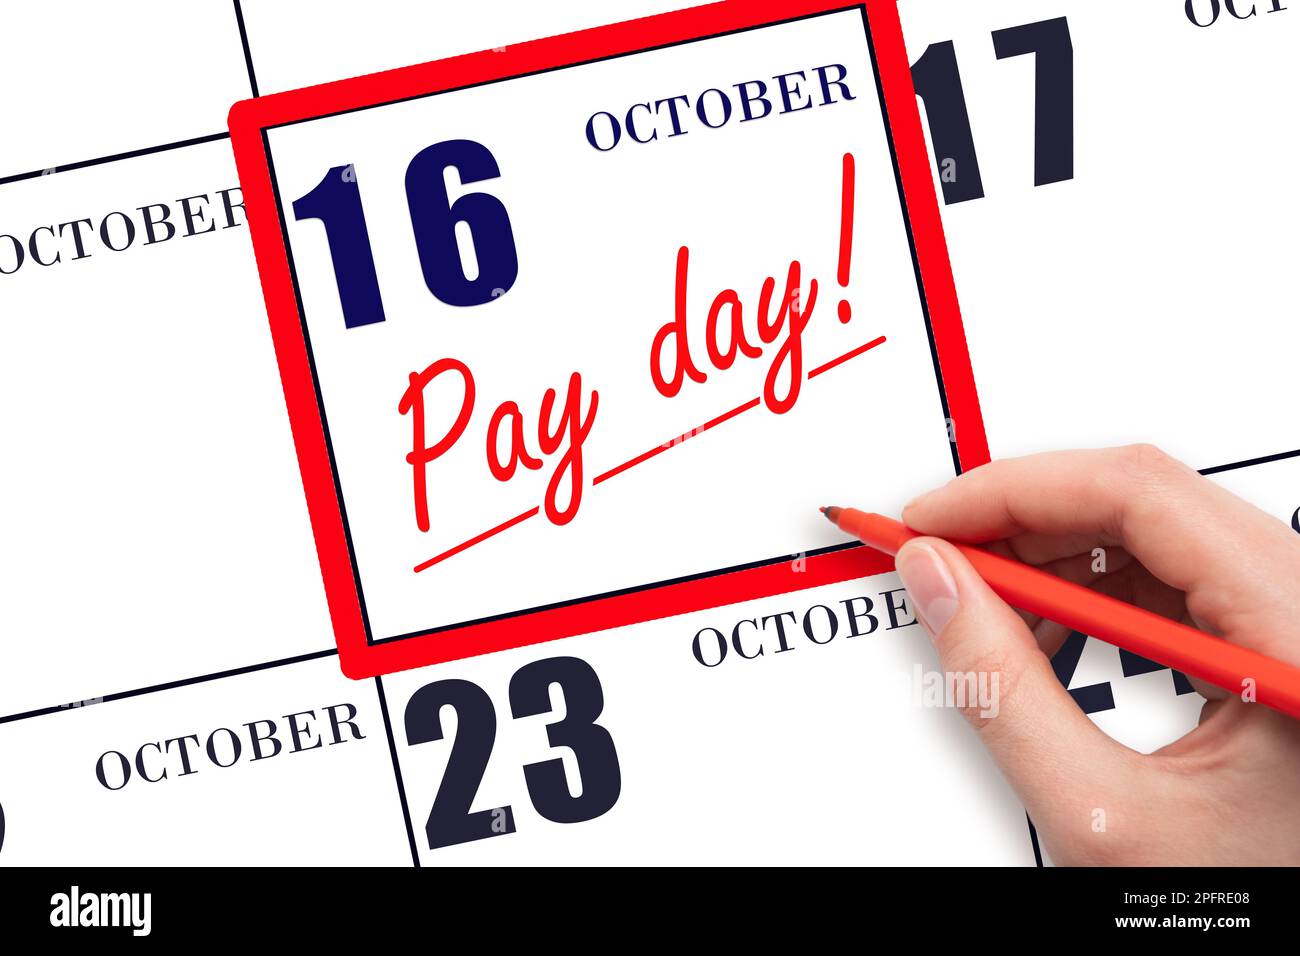 16th day of October. Hand writing text PAY DATE on calendar date October 16 and underline it. Payment due date.  Reminder concept of payment. Autumn m Stock Photo